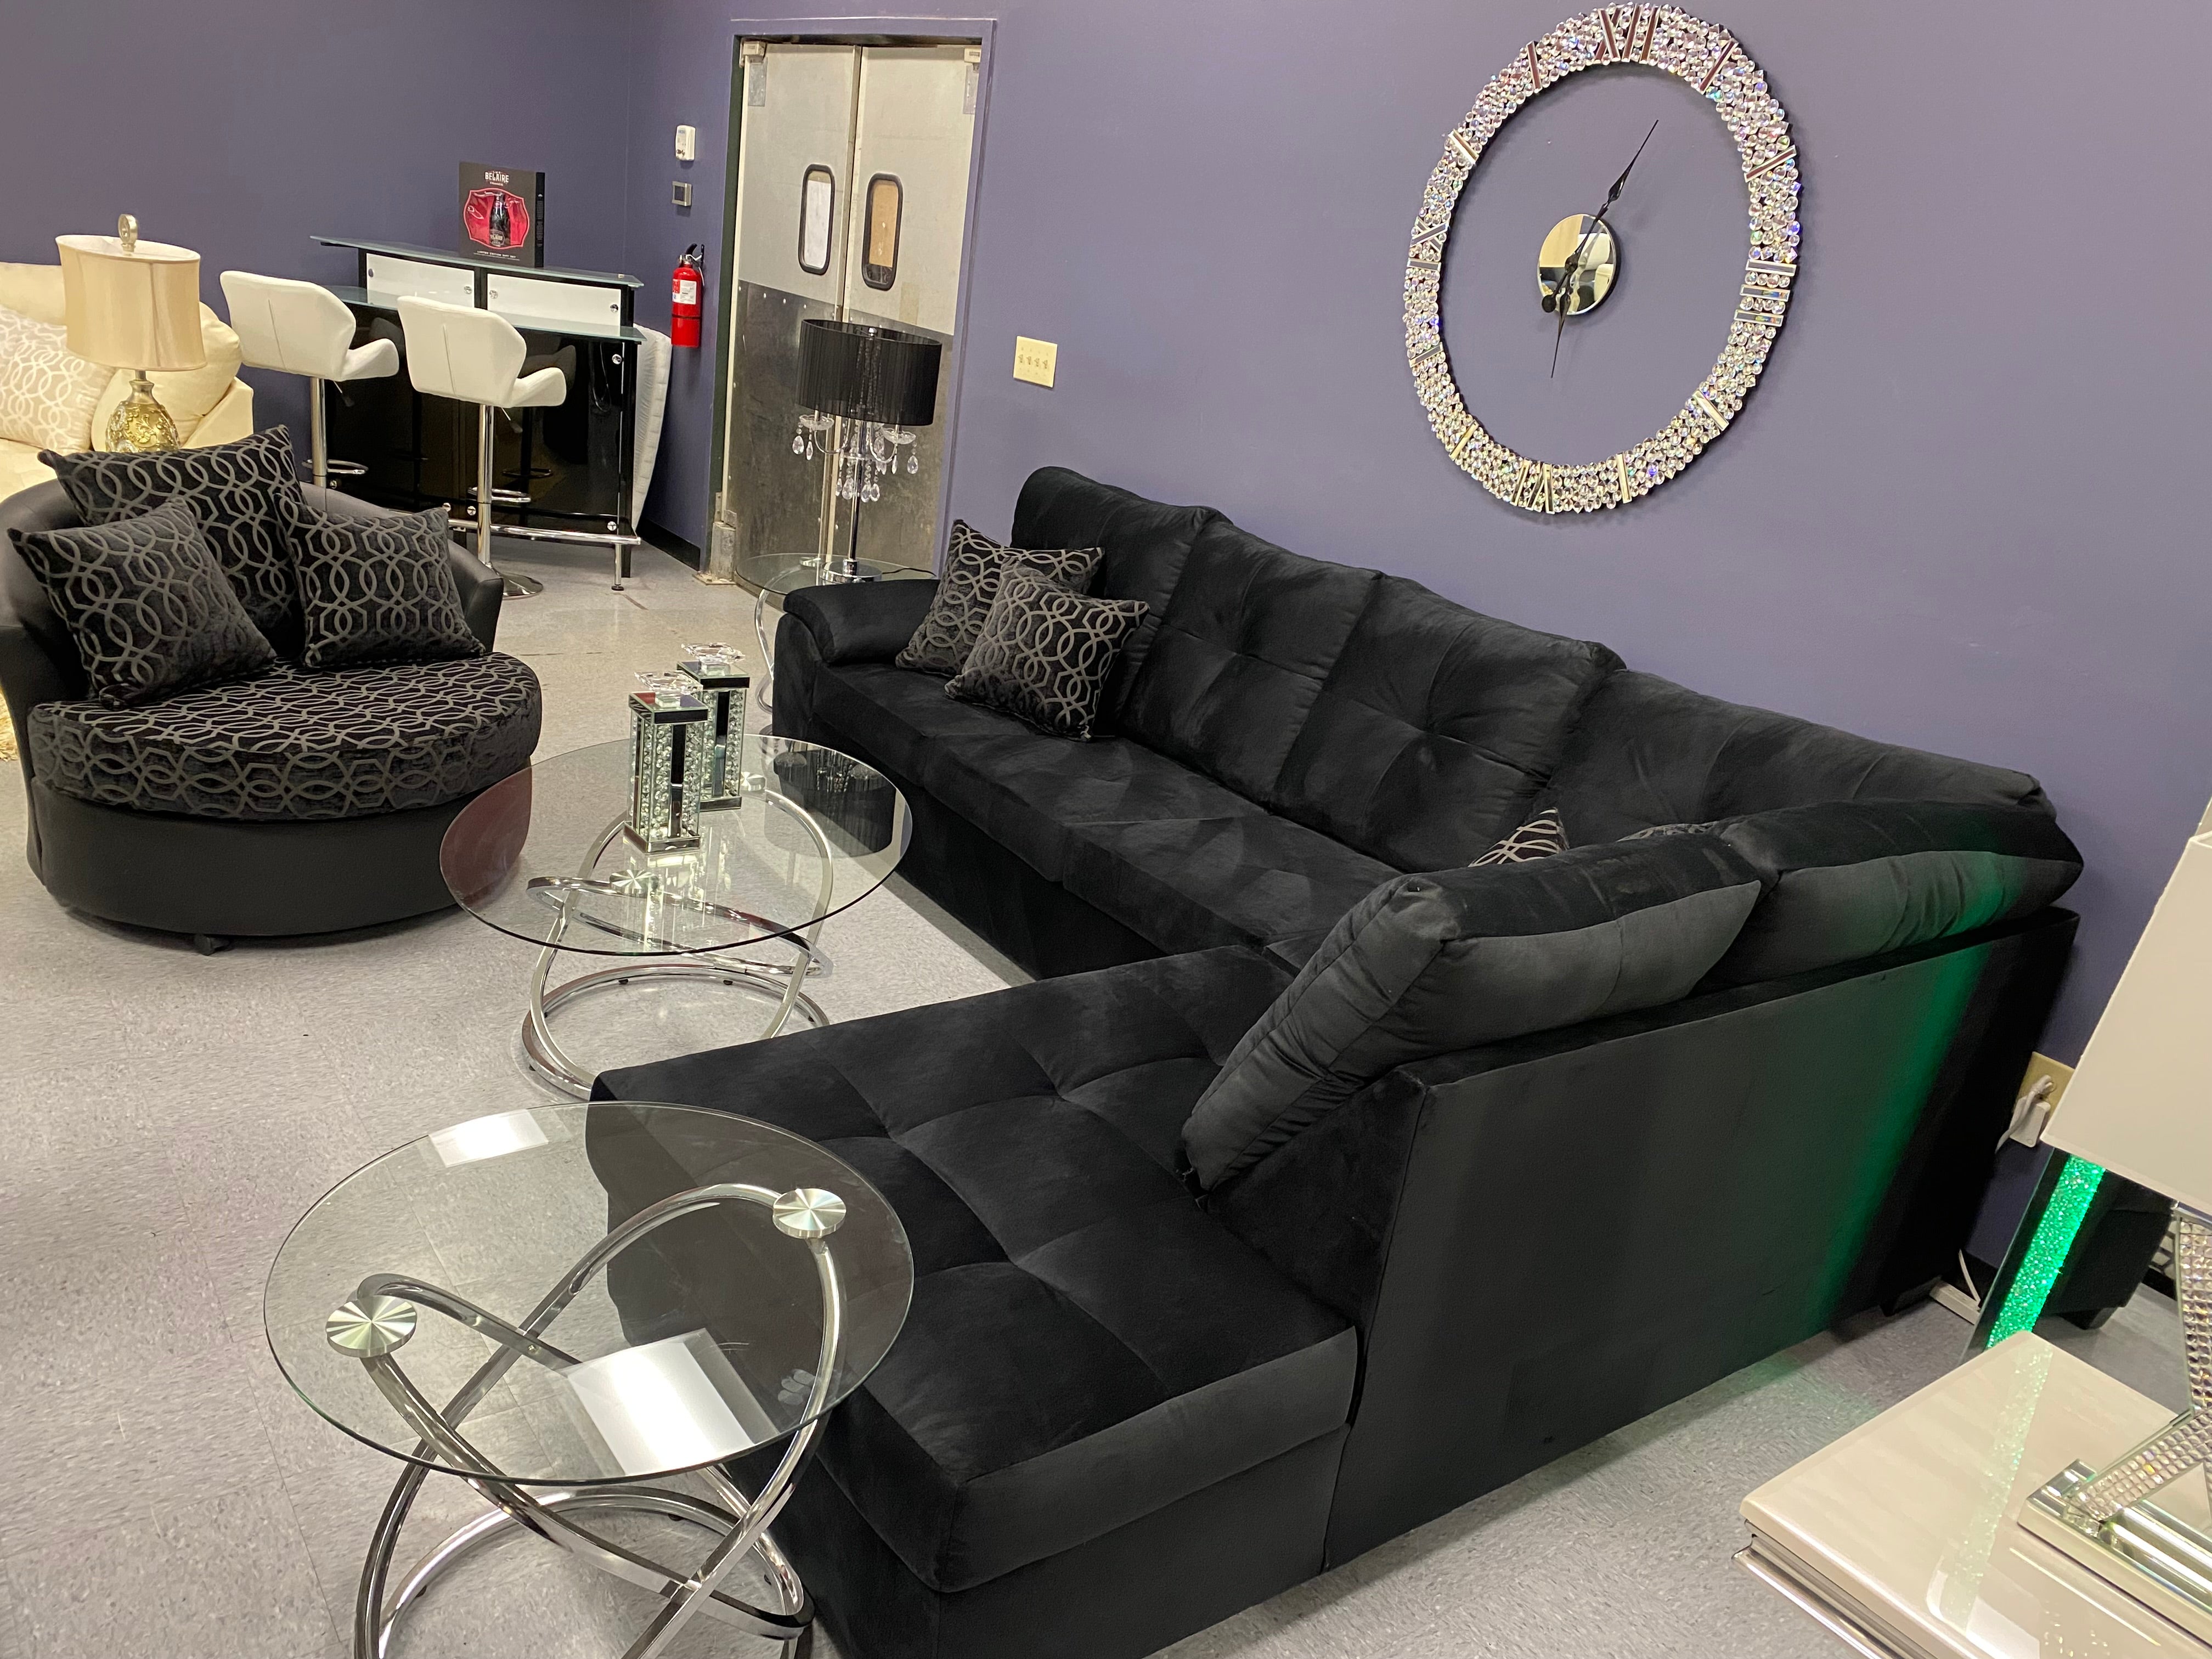 CRISTAL ROYALE Upholstered Sectional Sofa in Ebony BLACK Premium Chanel Velvet Fabric ** Available In Over 500 in house Colors and Patterns to Choose From, ** Custom Made To Order ** Design It Your Way